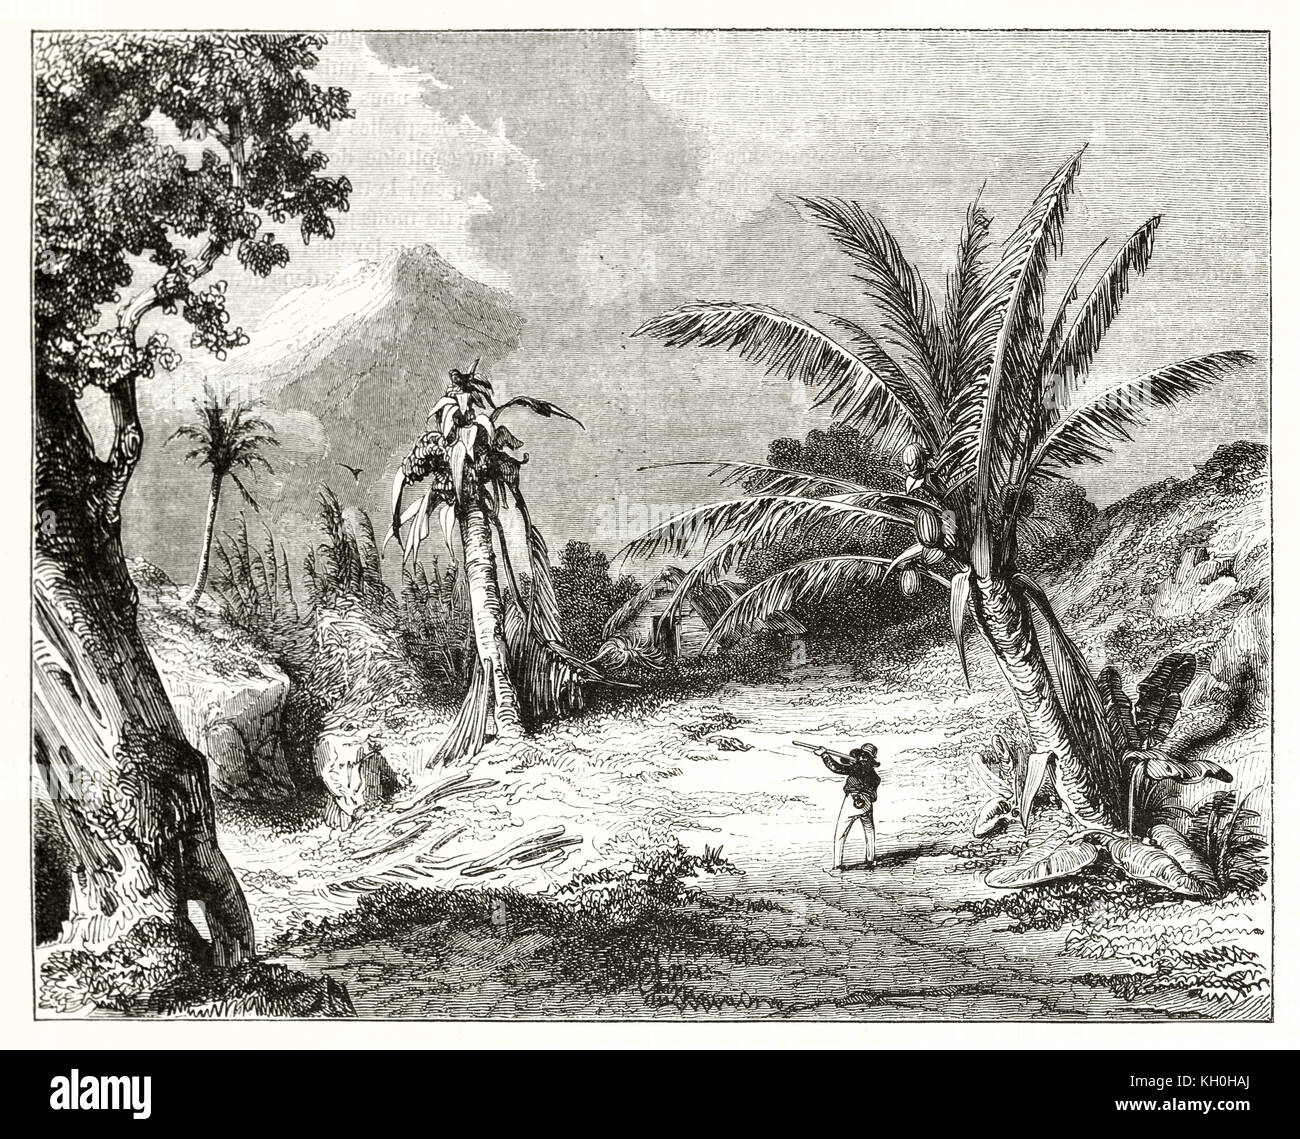 Old view of Guadeloupe. By Fontenay, publ. on Magasin Pittoresque, Paris, 1847 Stock Photo